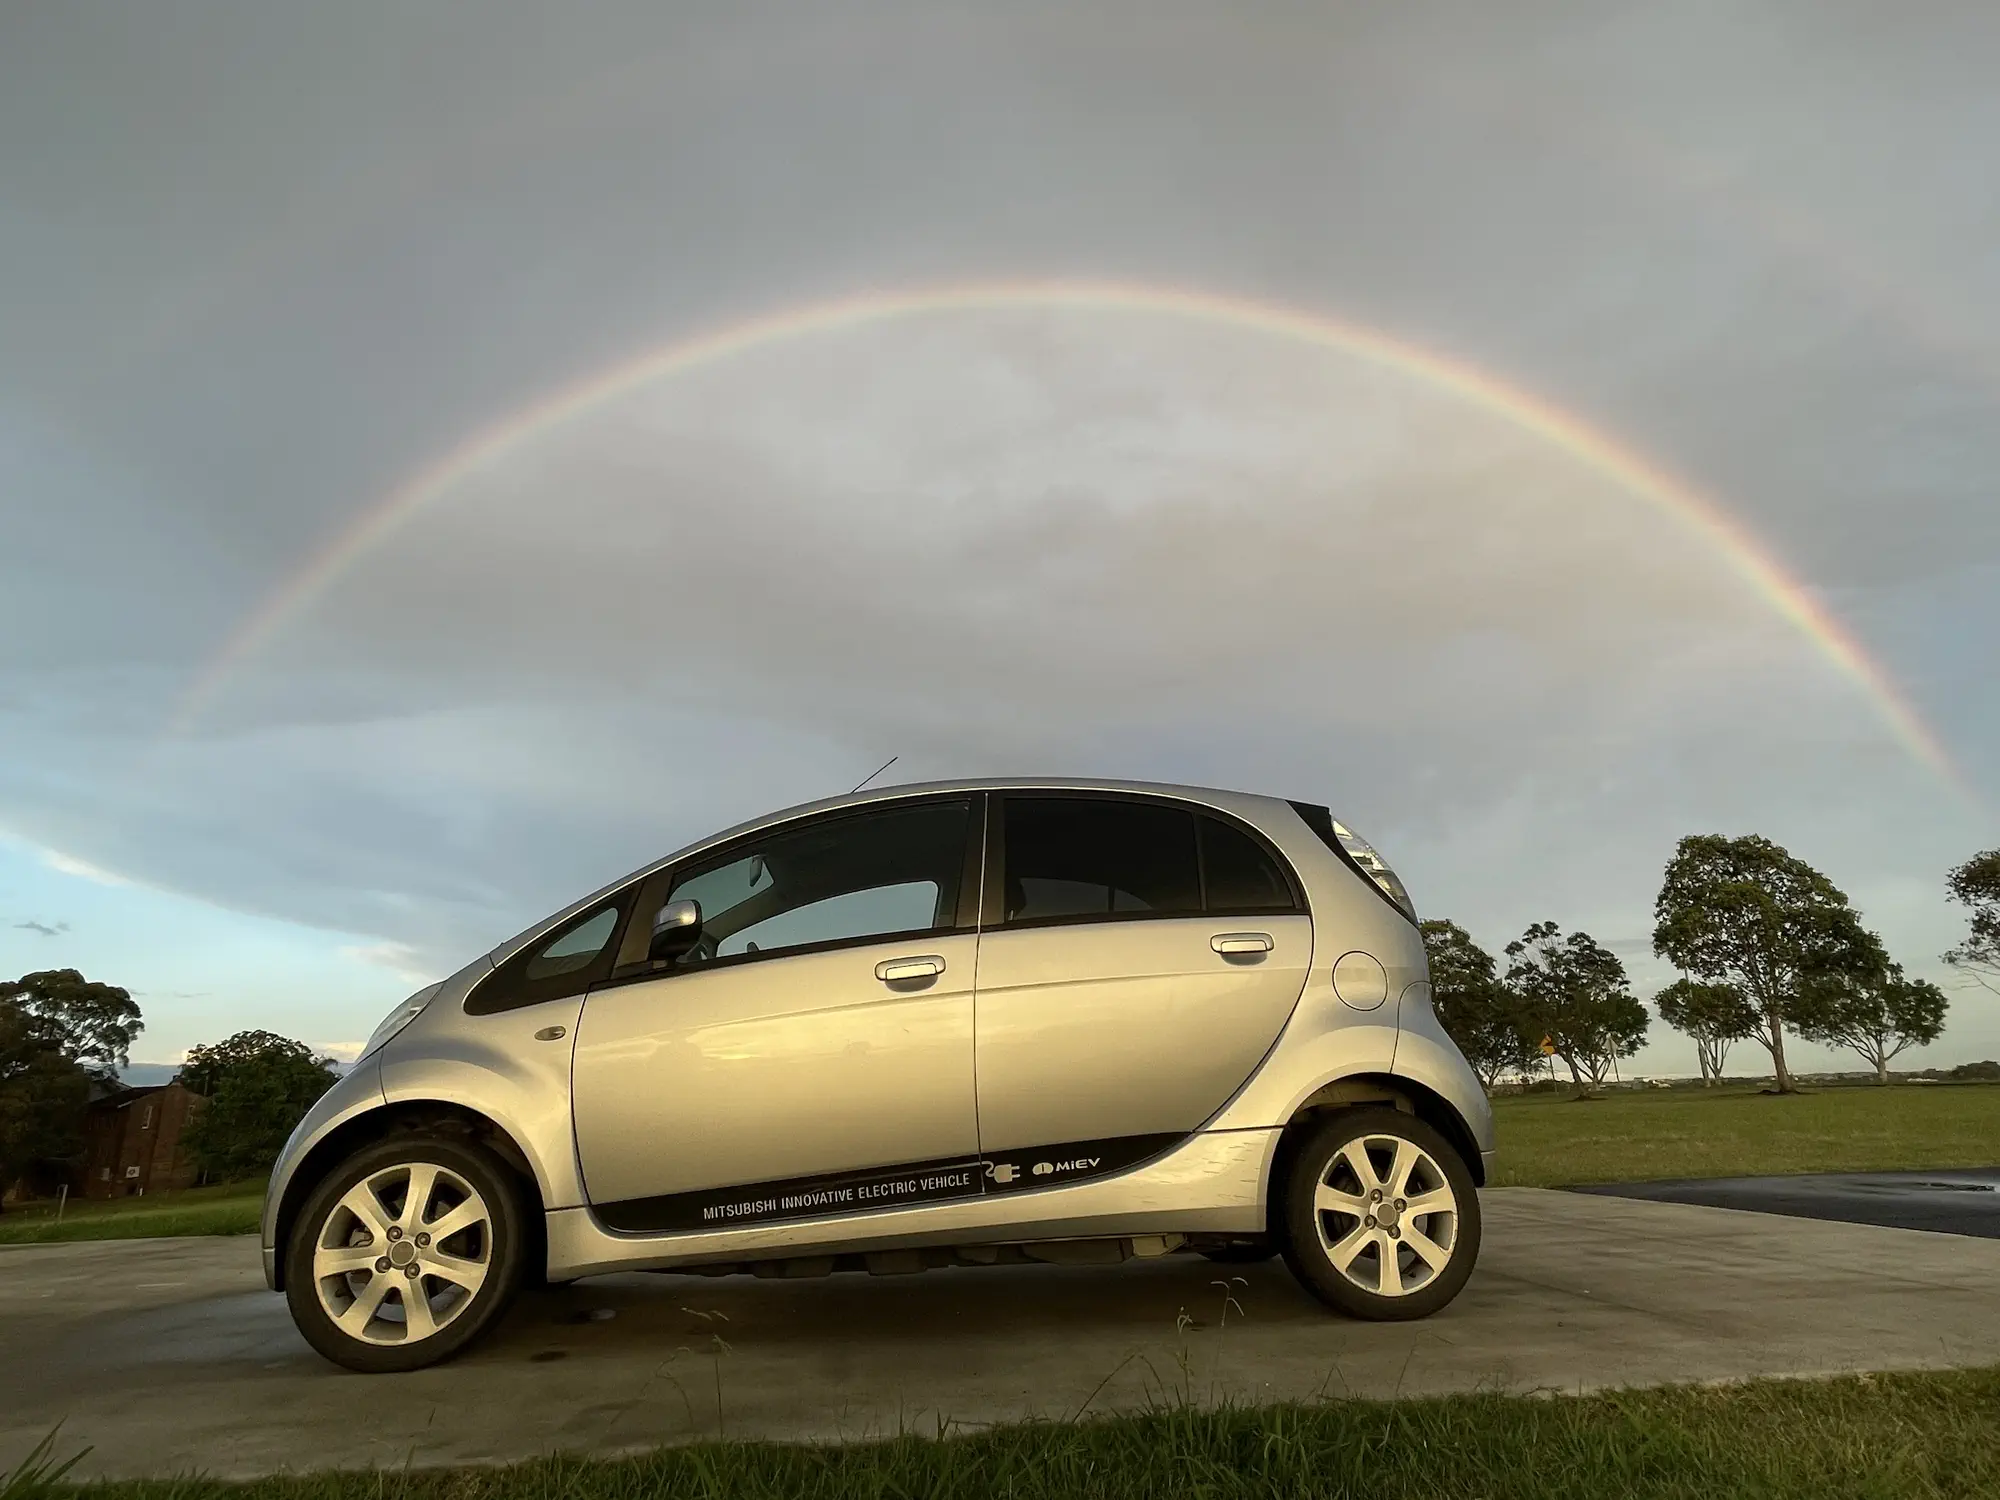 Mitsubishi i-MiEV 2009 – Australian electric car owner real world experience review